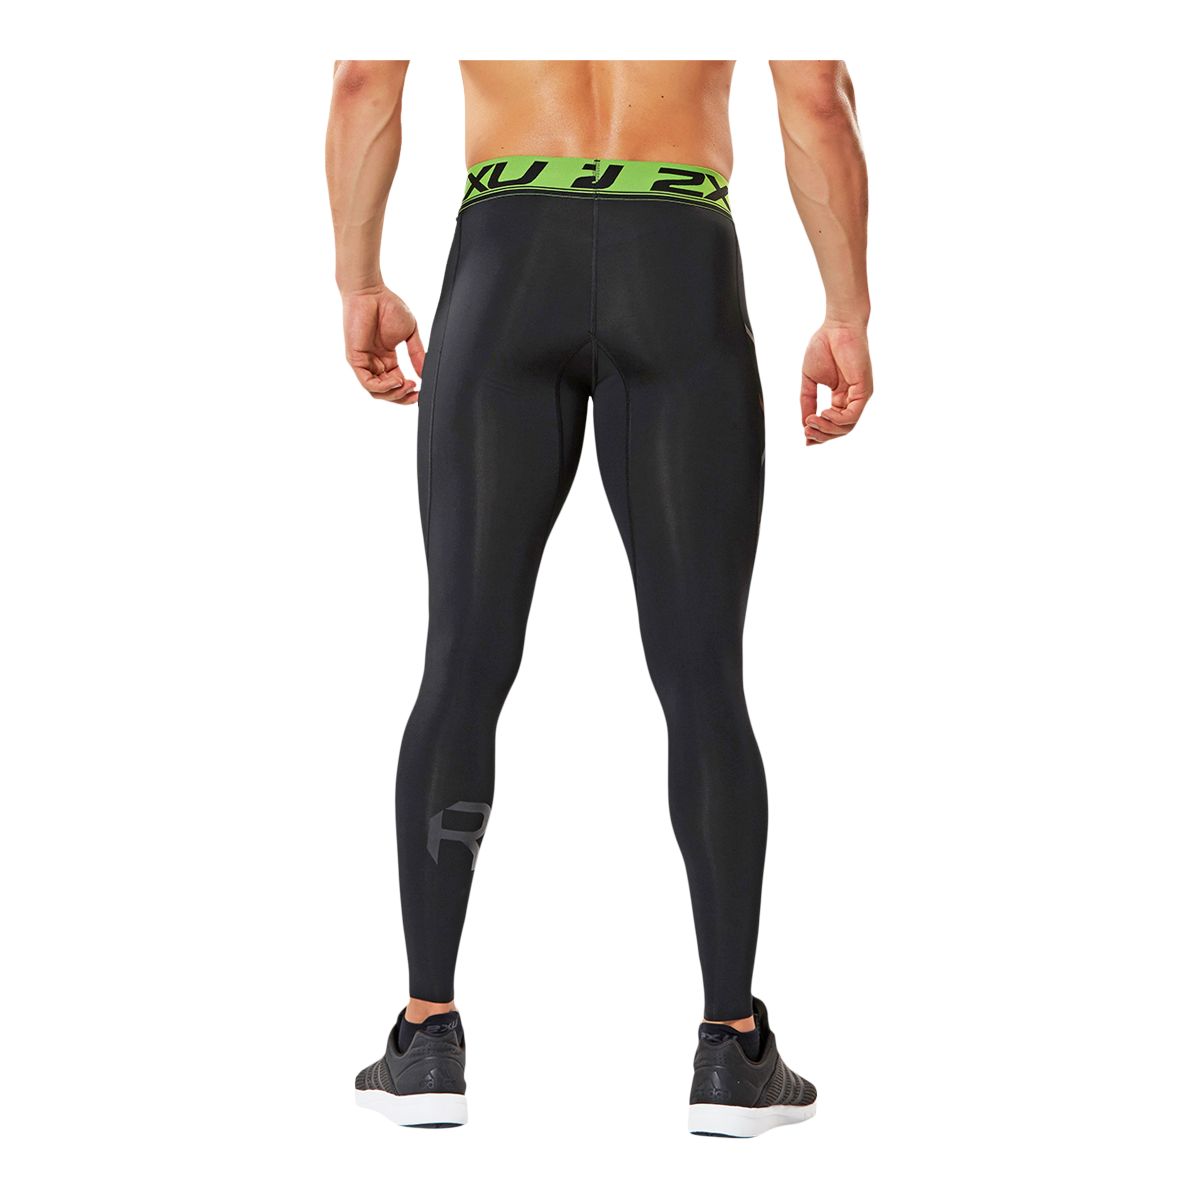 2XU THERMAL 3/4 COMPRESSION TIGHTS - Mike's Bike Shop